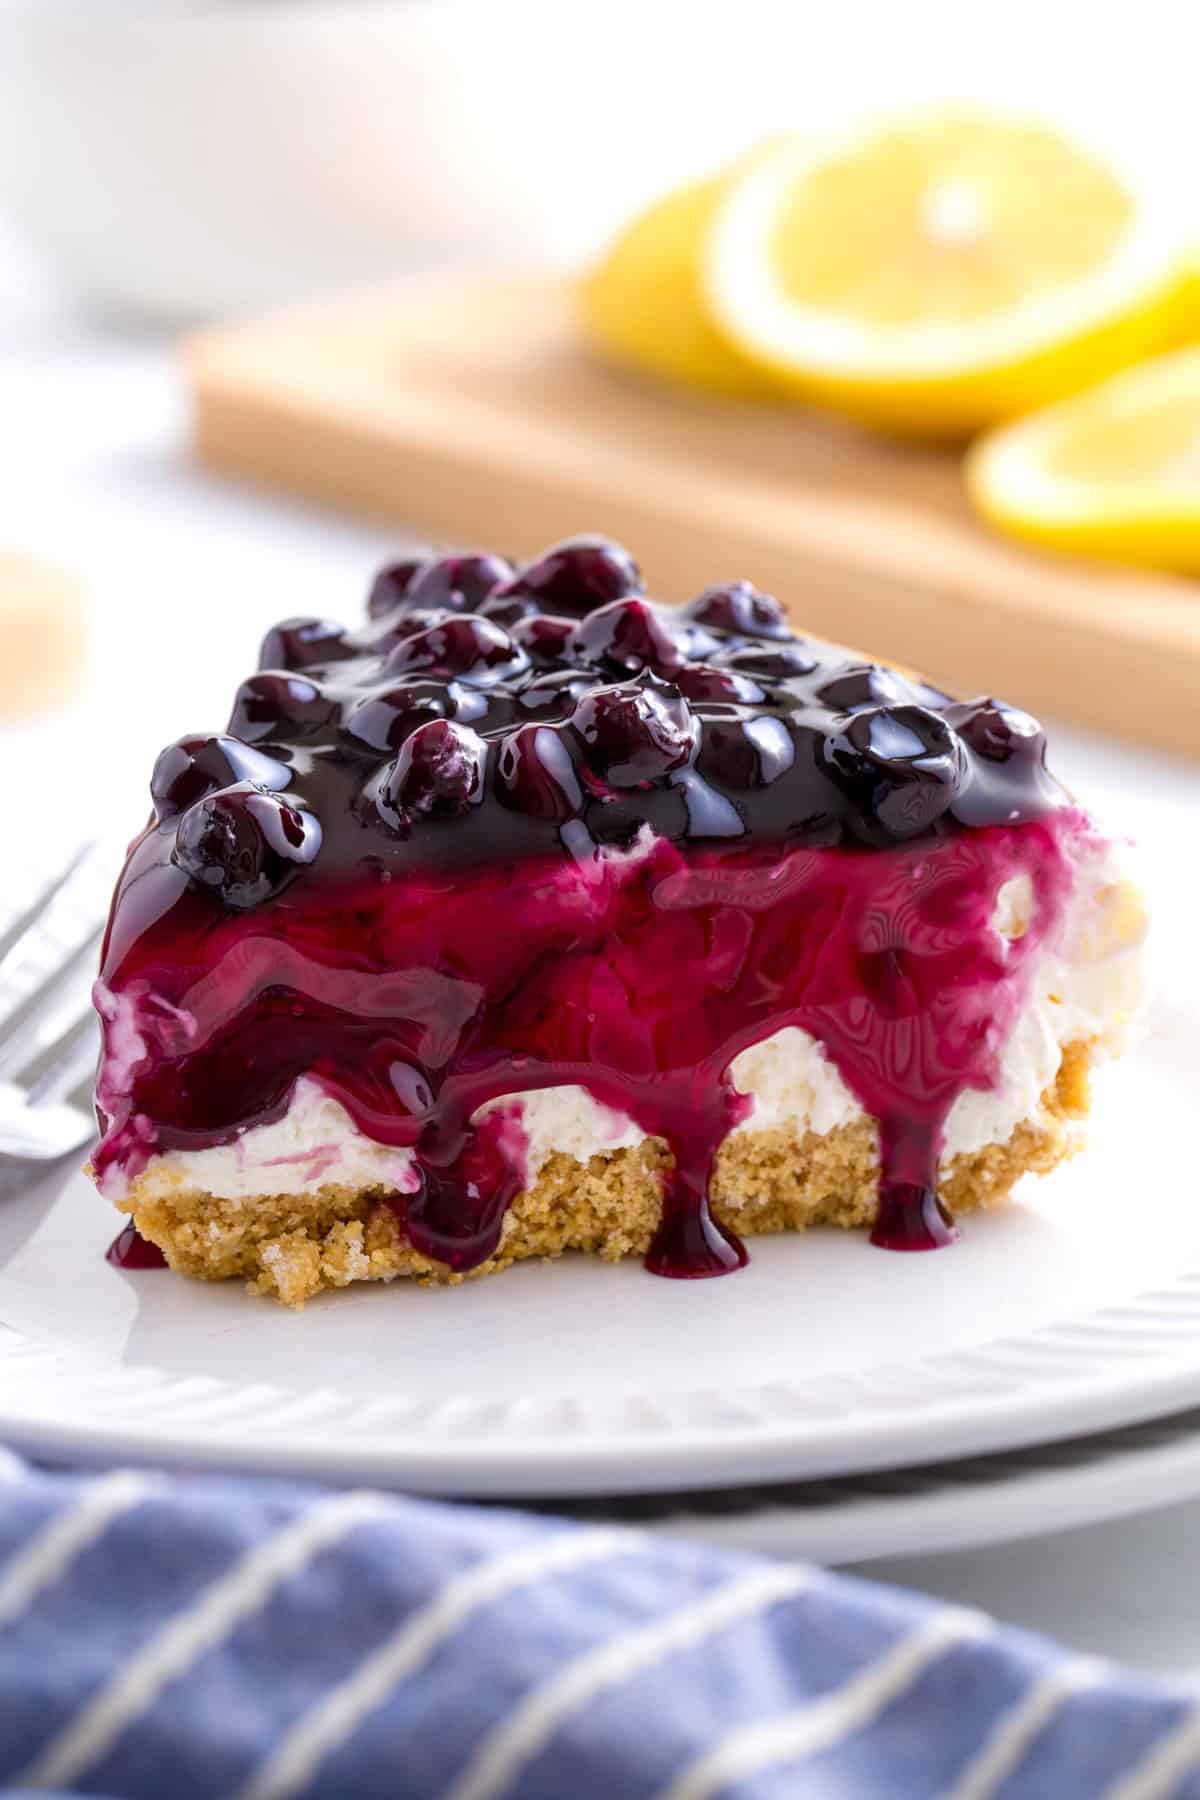 Slice of no-bake blueberry cheesecake served on a white round plate